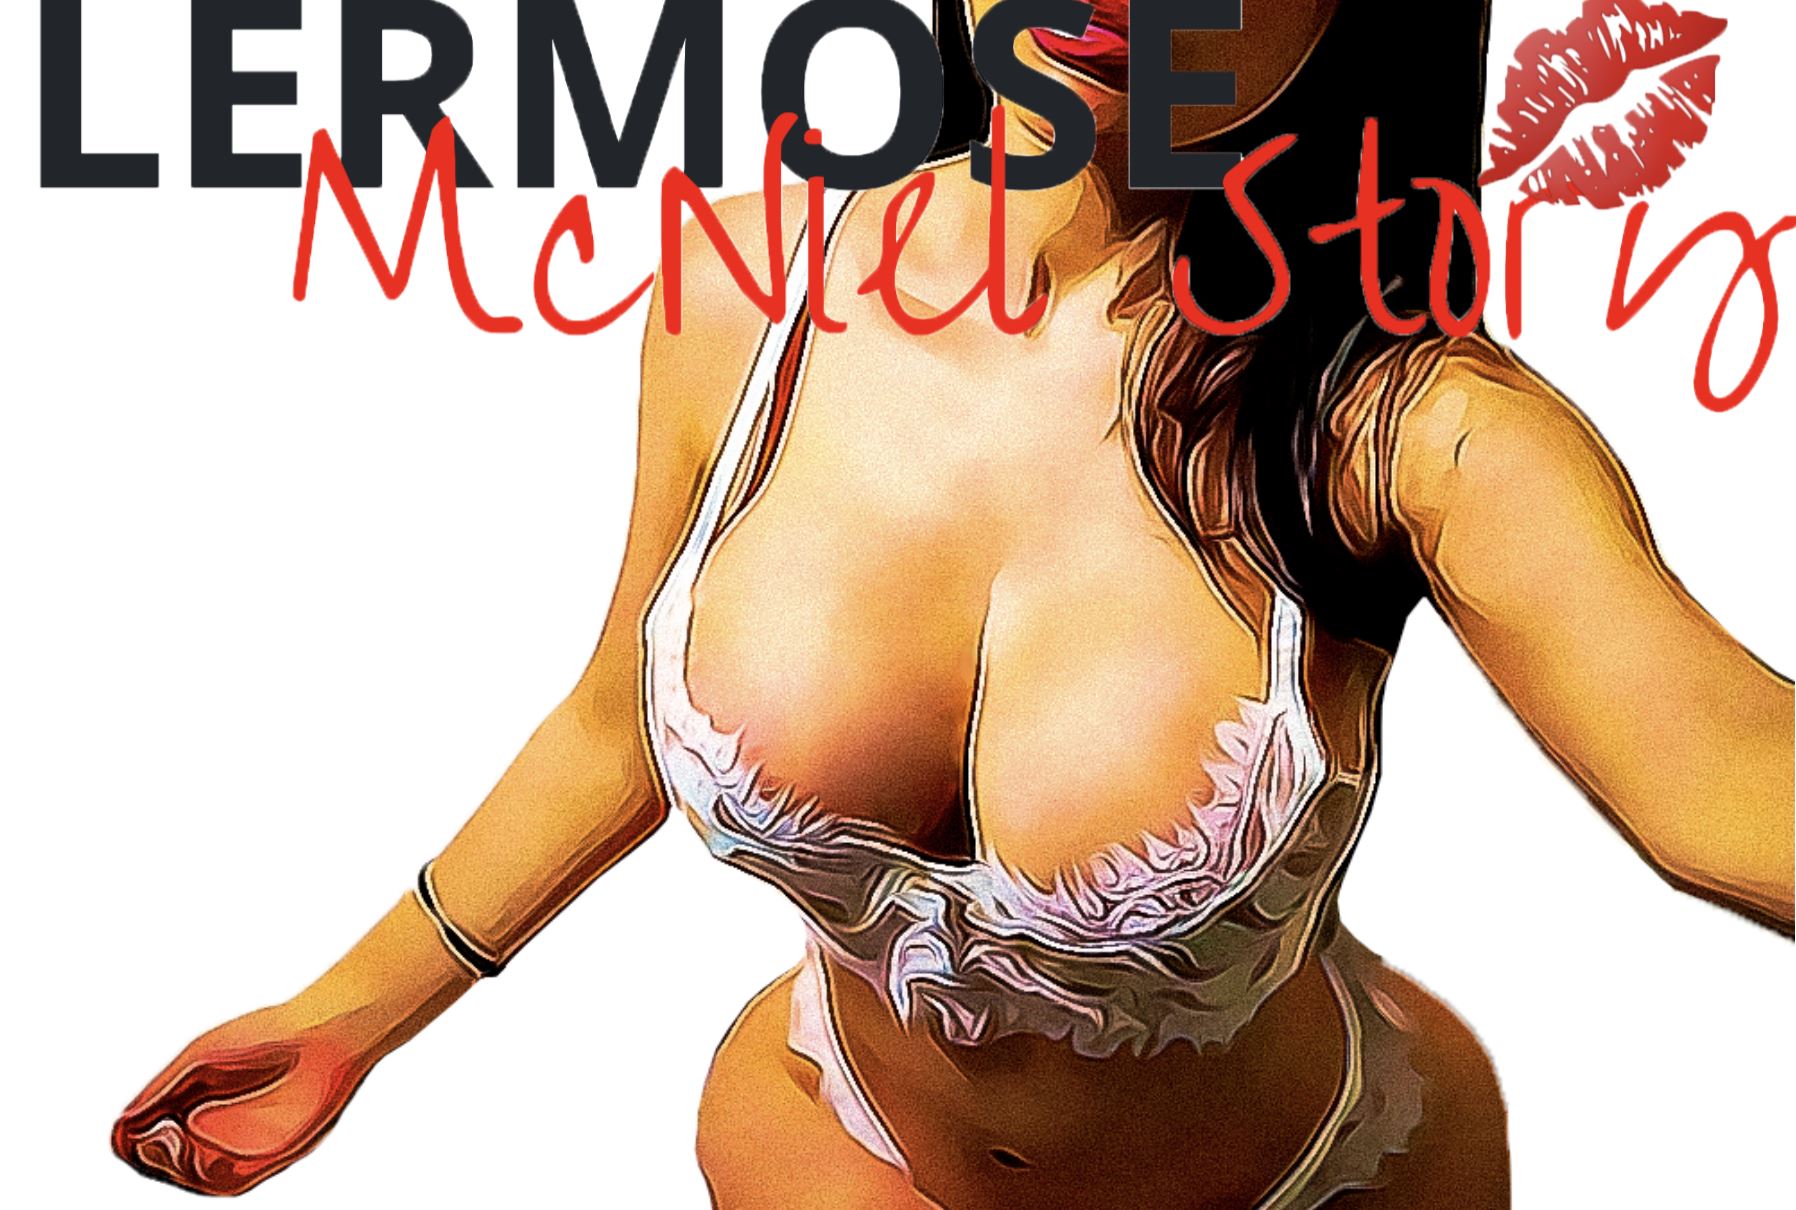 Lermose: McNiel Story porn xxx game download cover